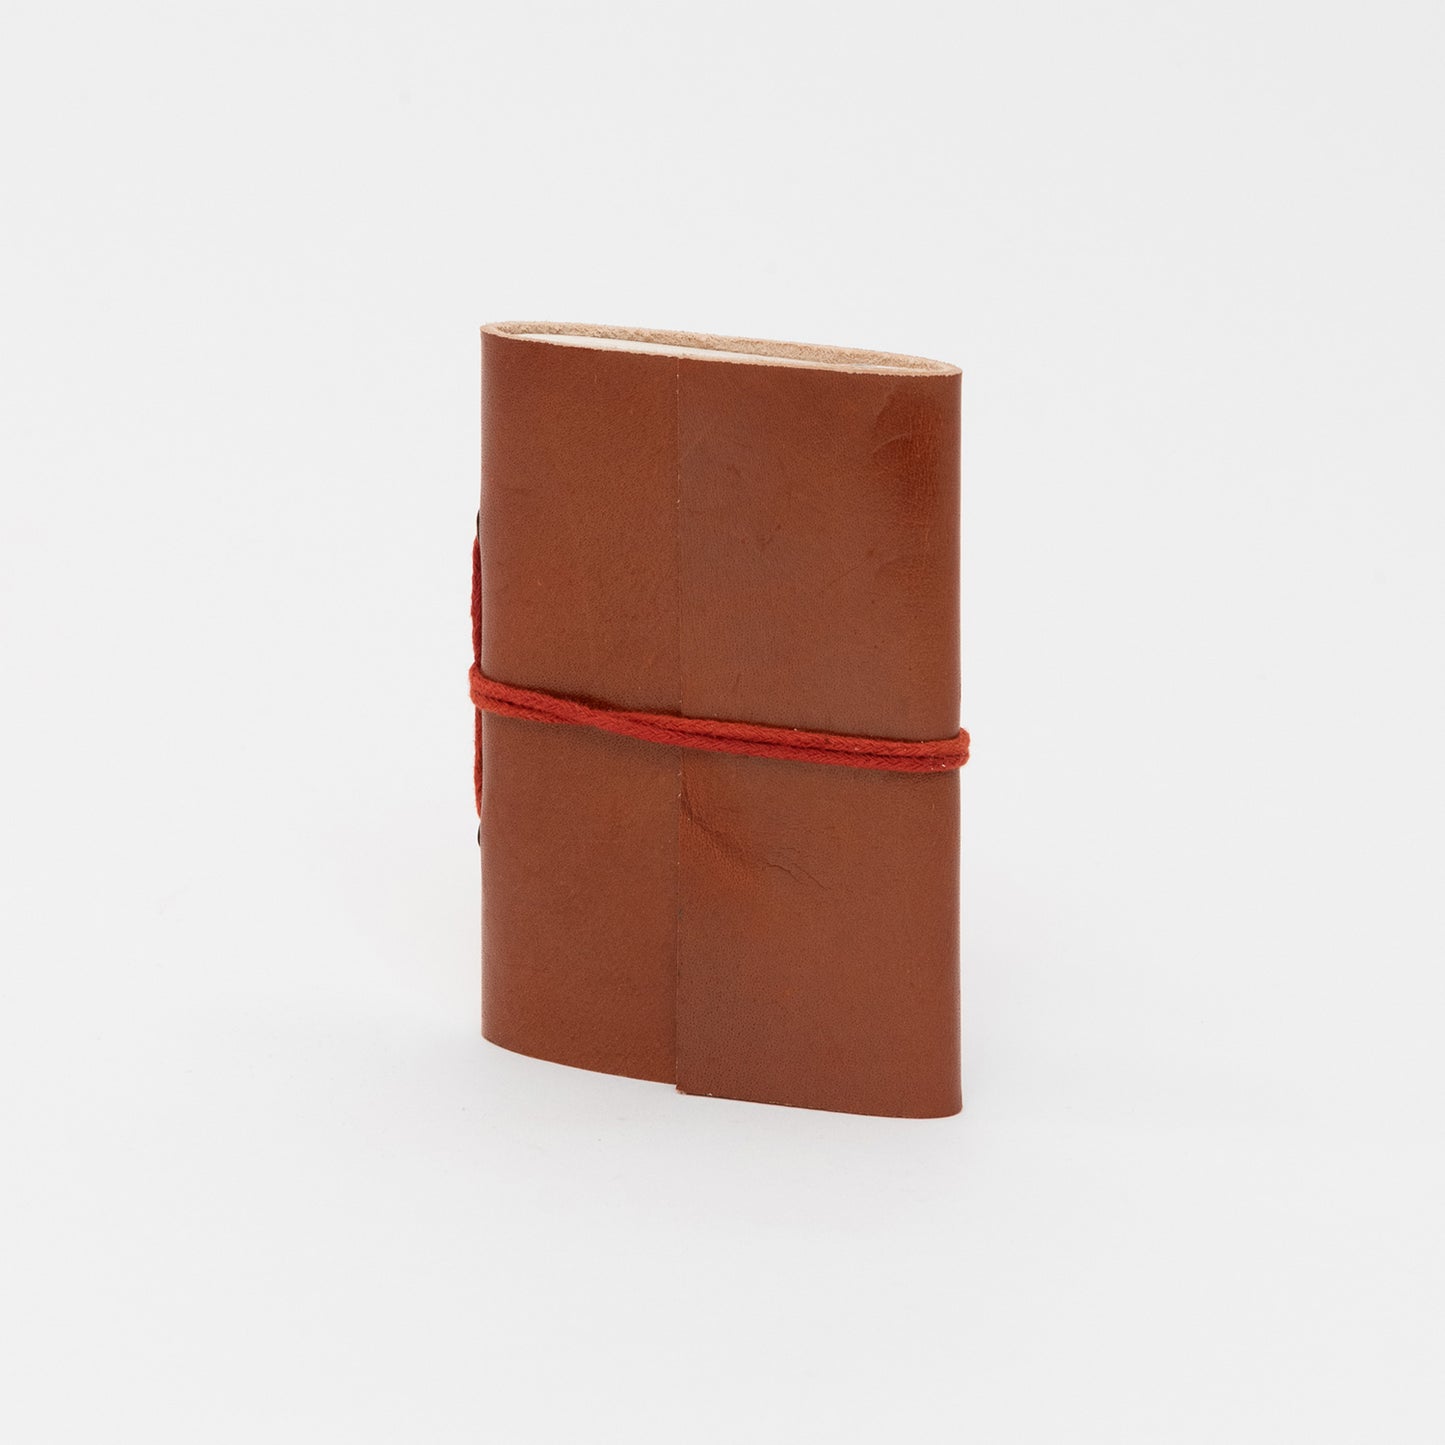 A tan leather bound journal with a leather tie around the middle.